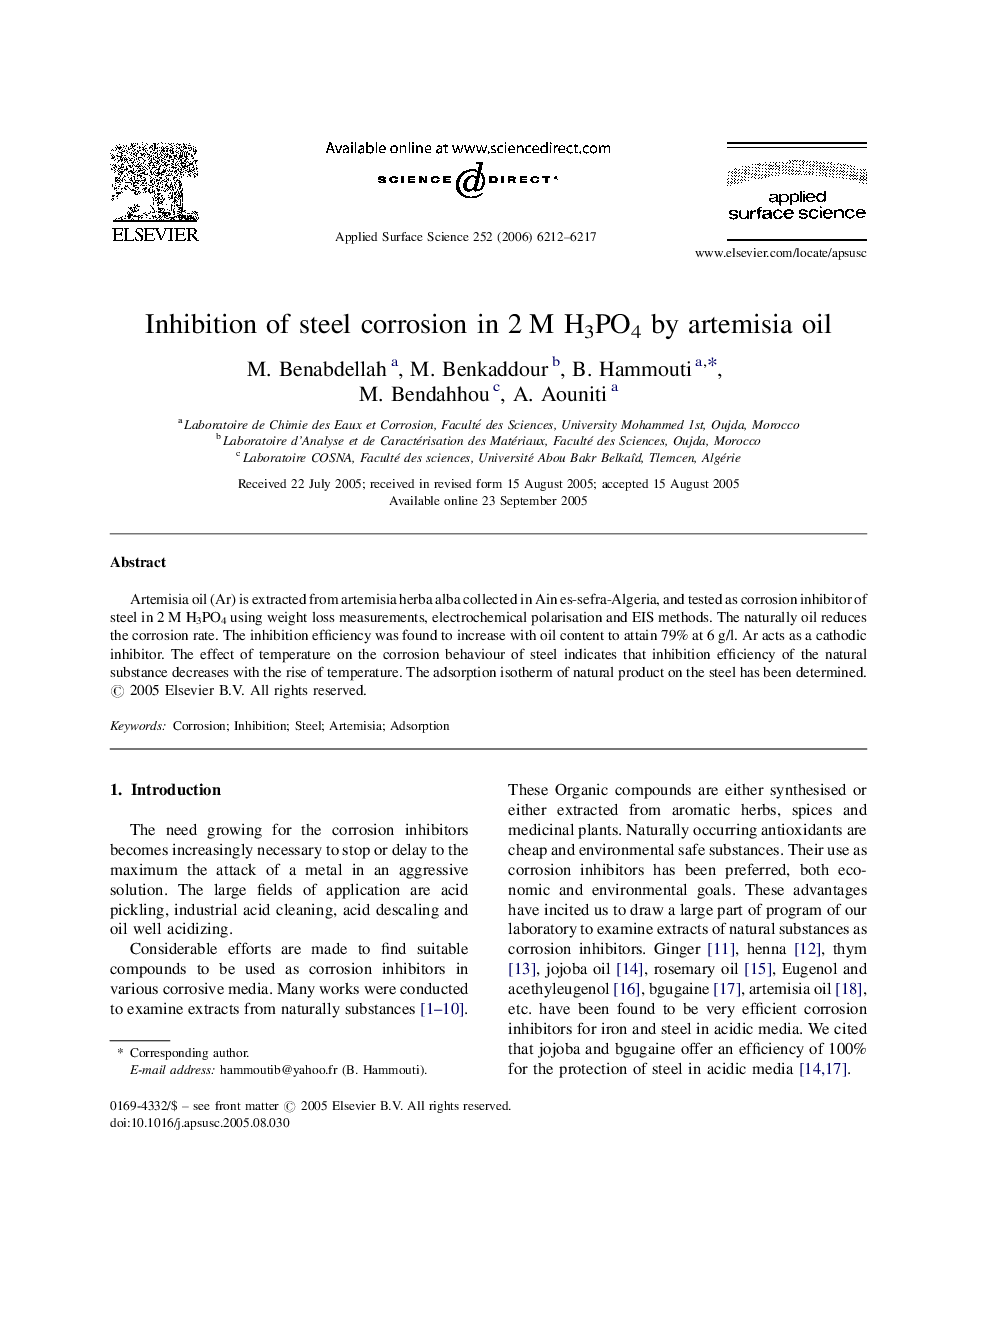 Inhibition of steel corrosion in 2 M H3PO4 by artemisia oil